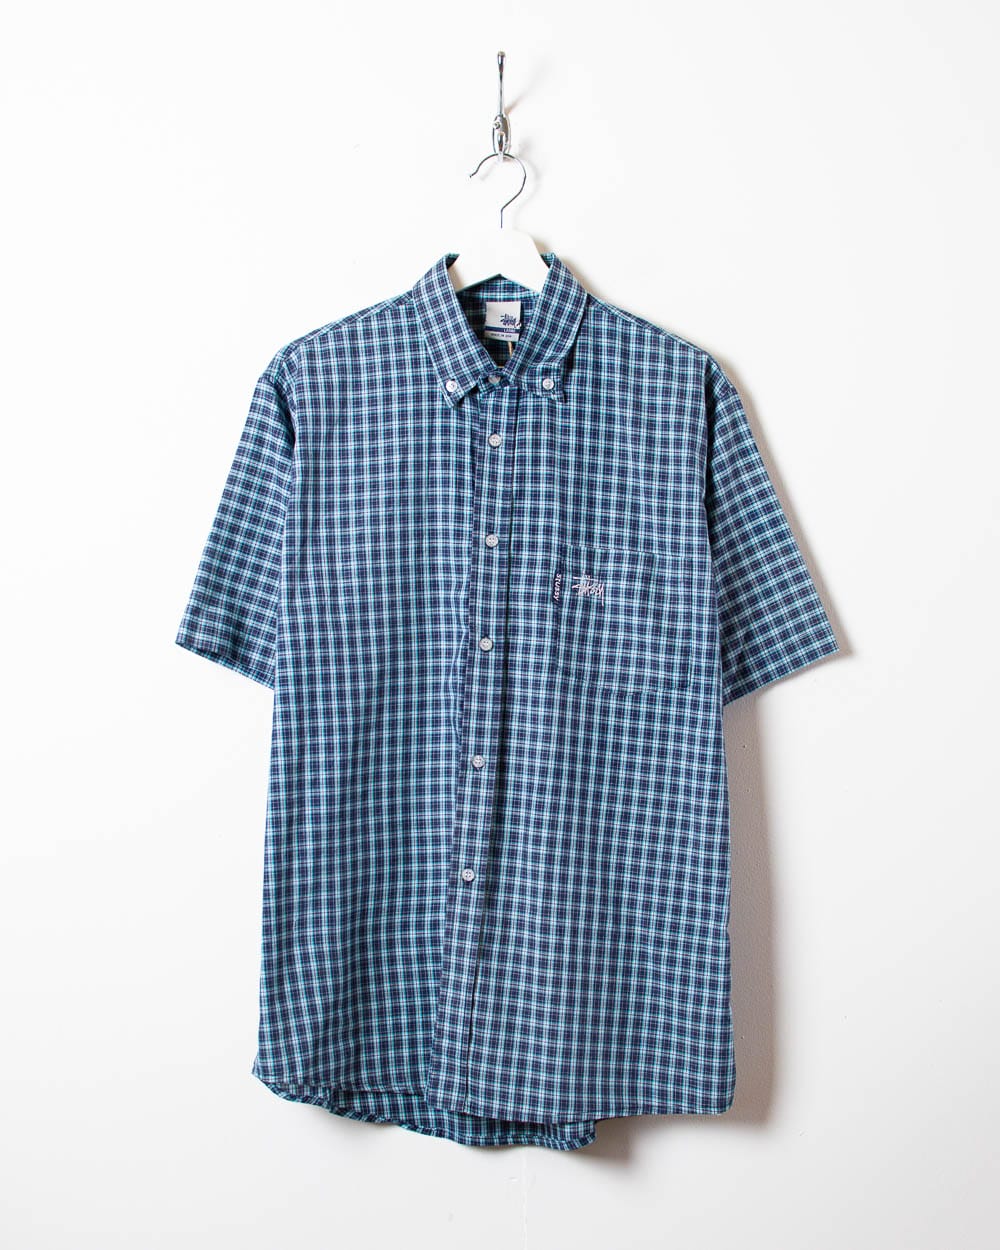 Vintage 90s Blue Stussy Checked Short Sleeved Shirt - X-Large 